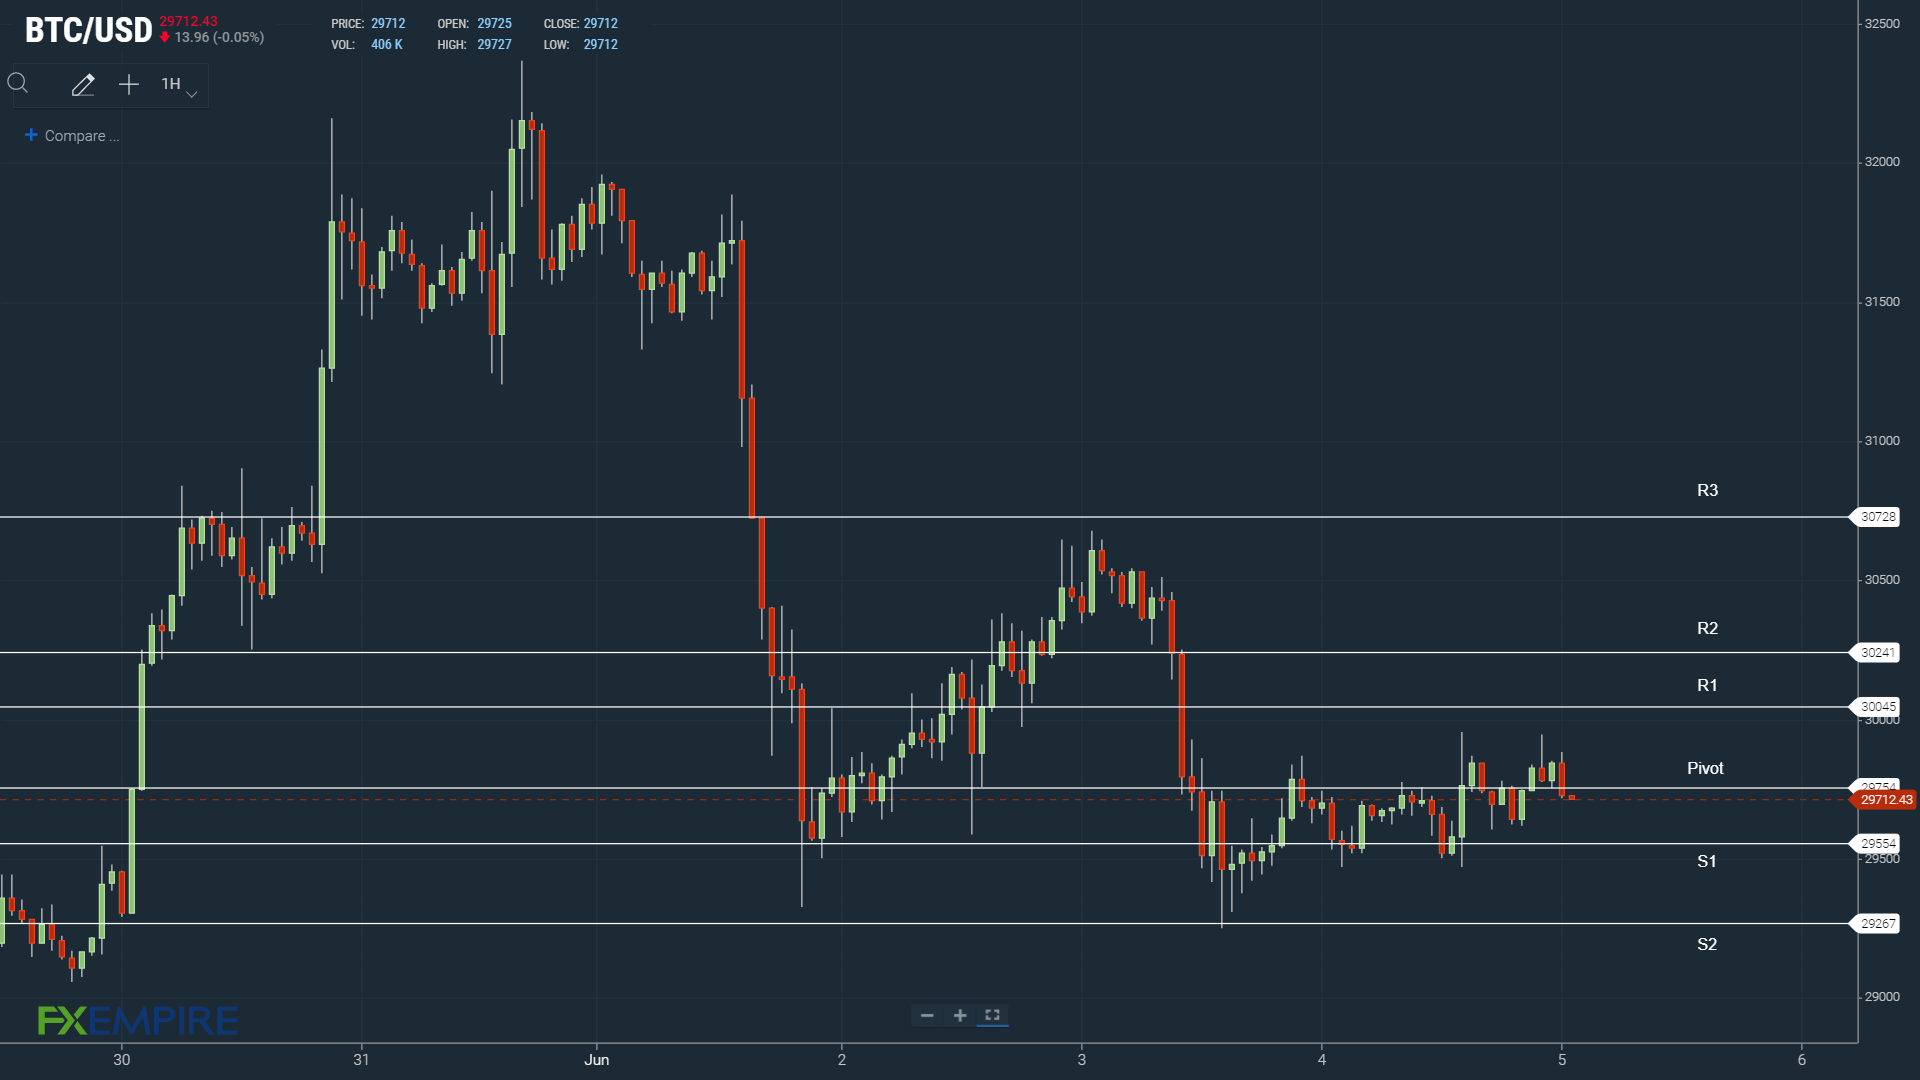 A BTC move through the pivot needed to avoid a loss.